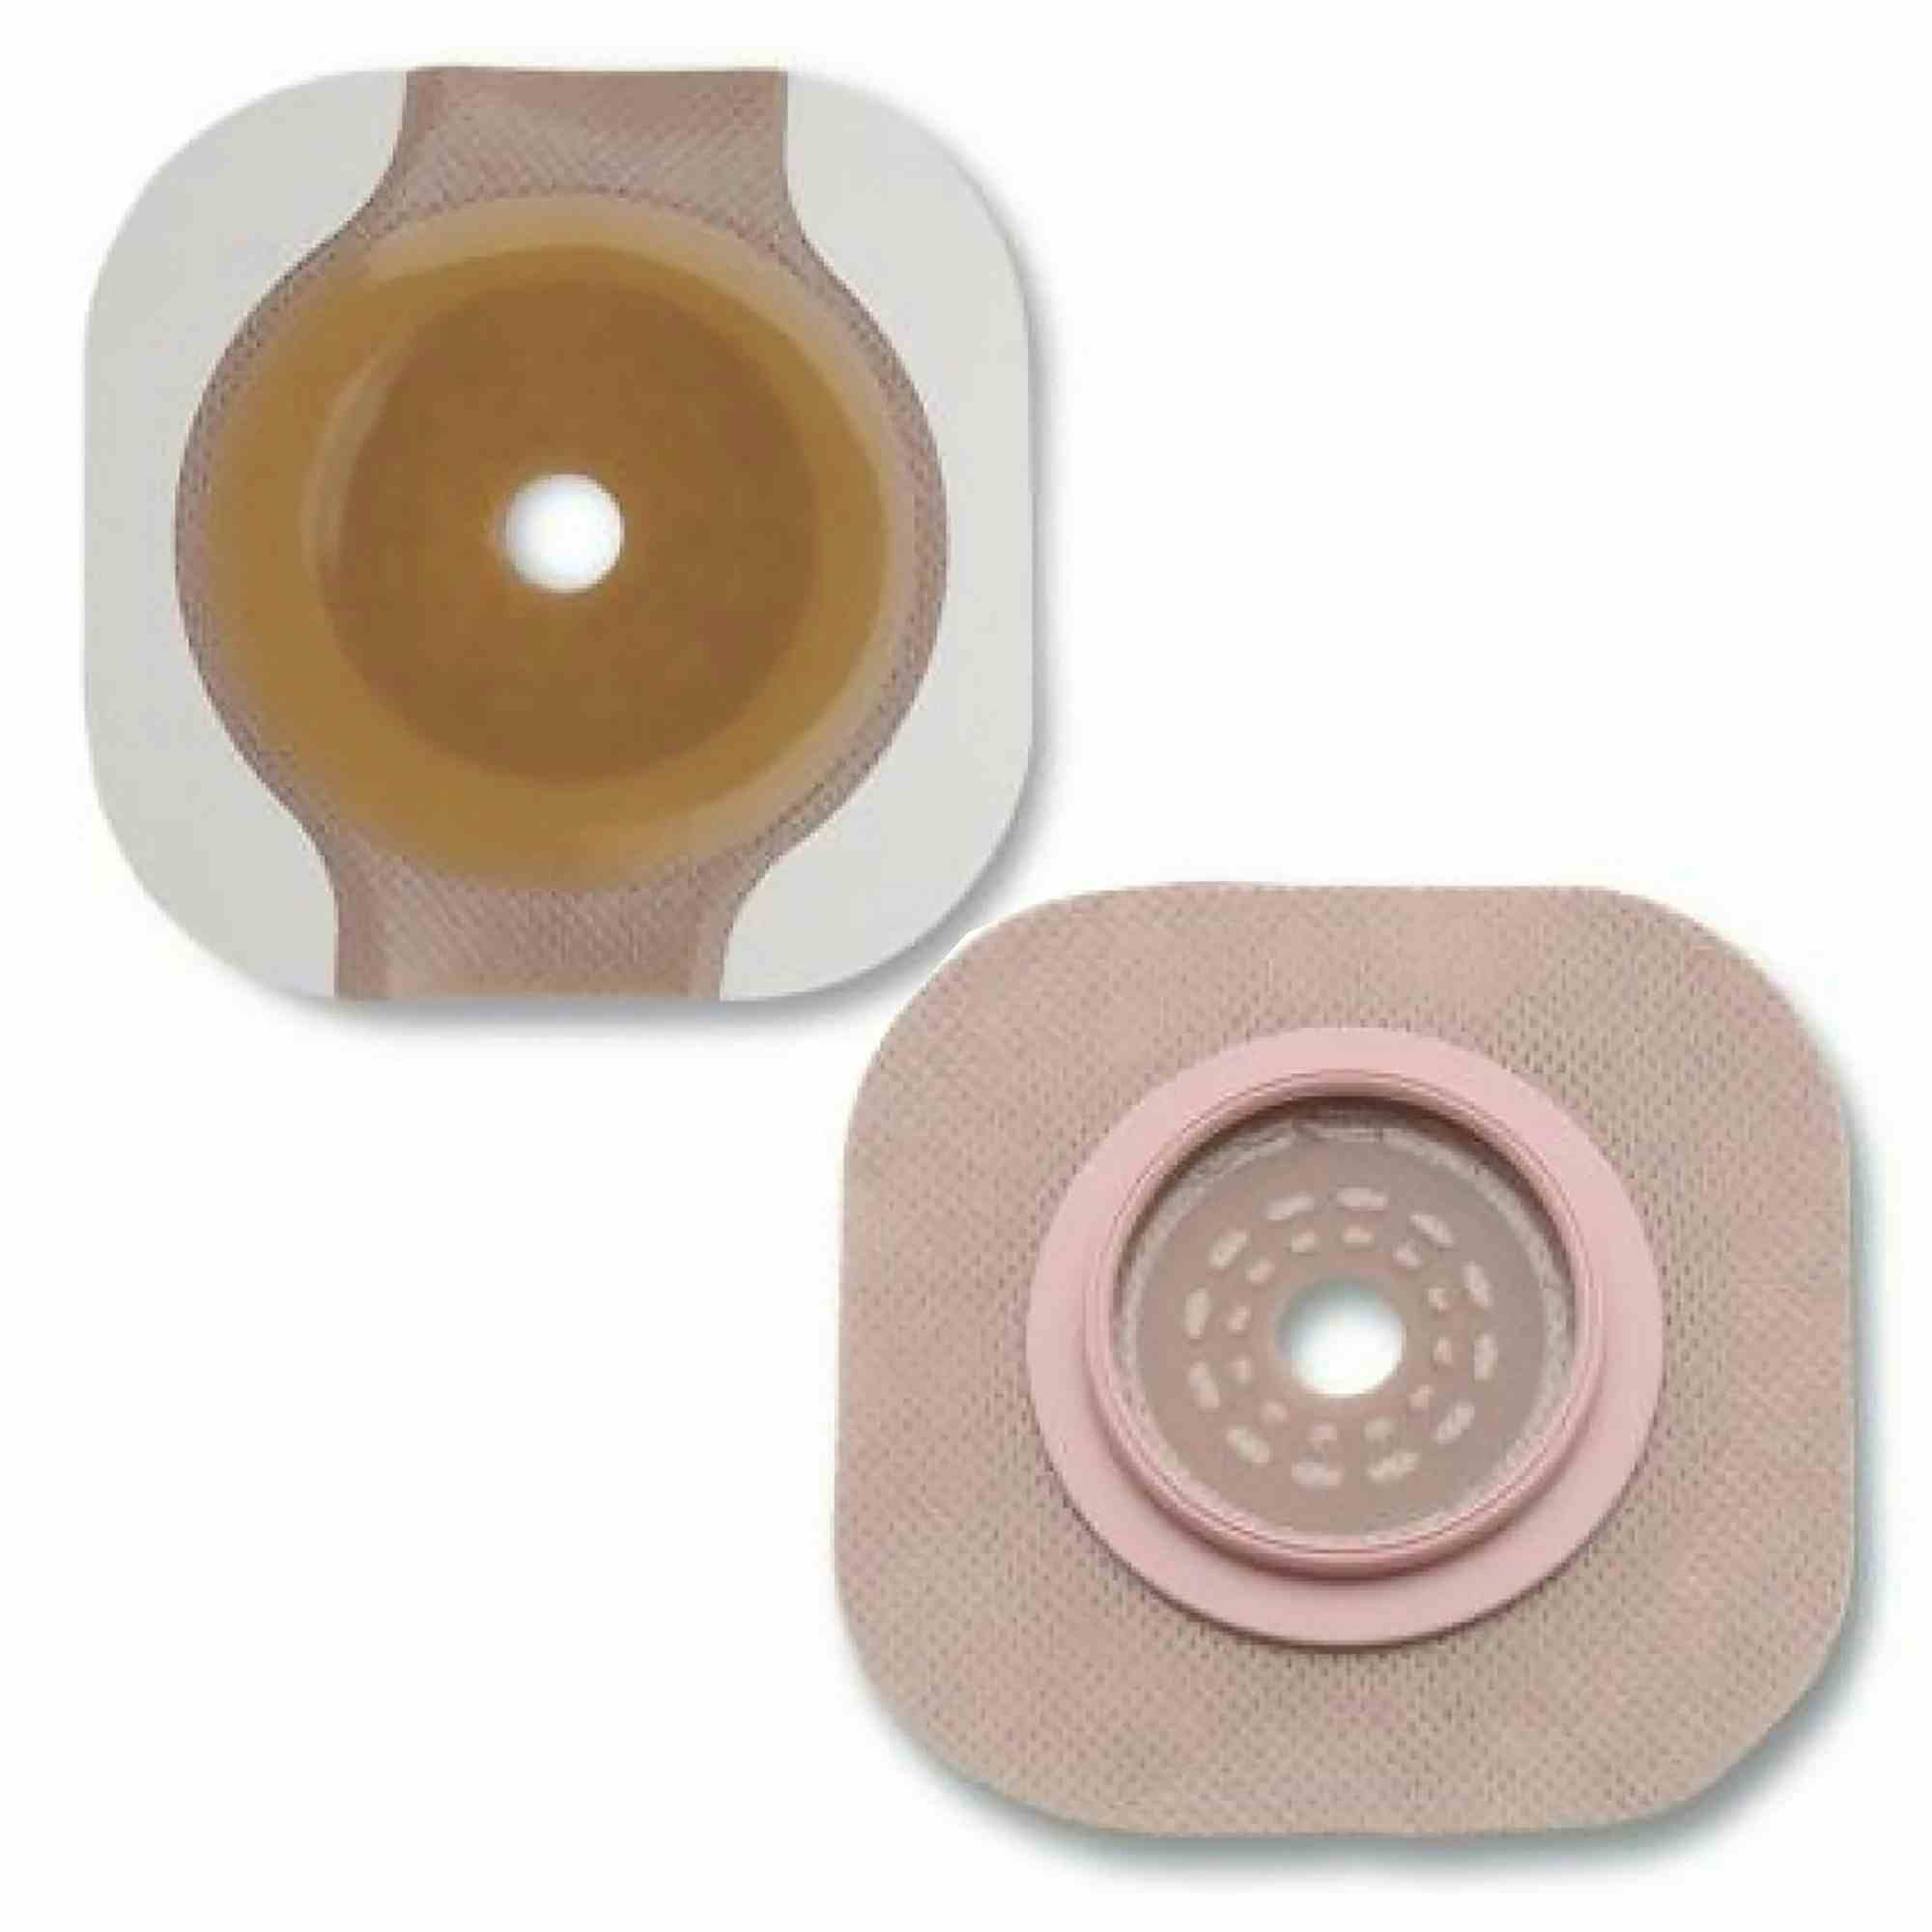 New Image Flextend Ostomy Barrier, Trim to Fit, 57 mm Flange, 14603, Box of 5